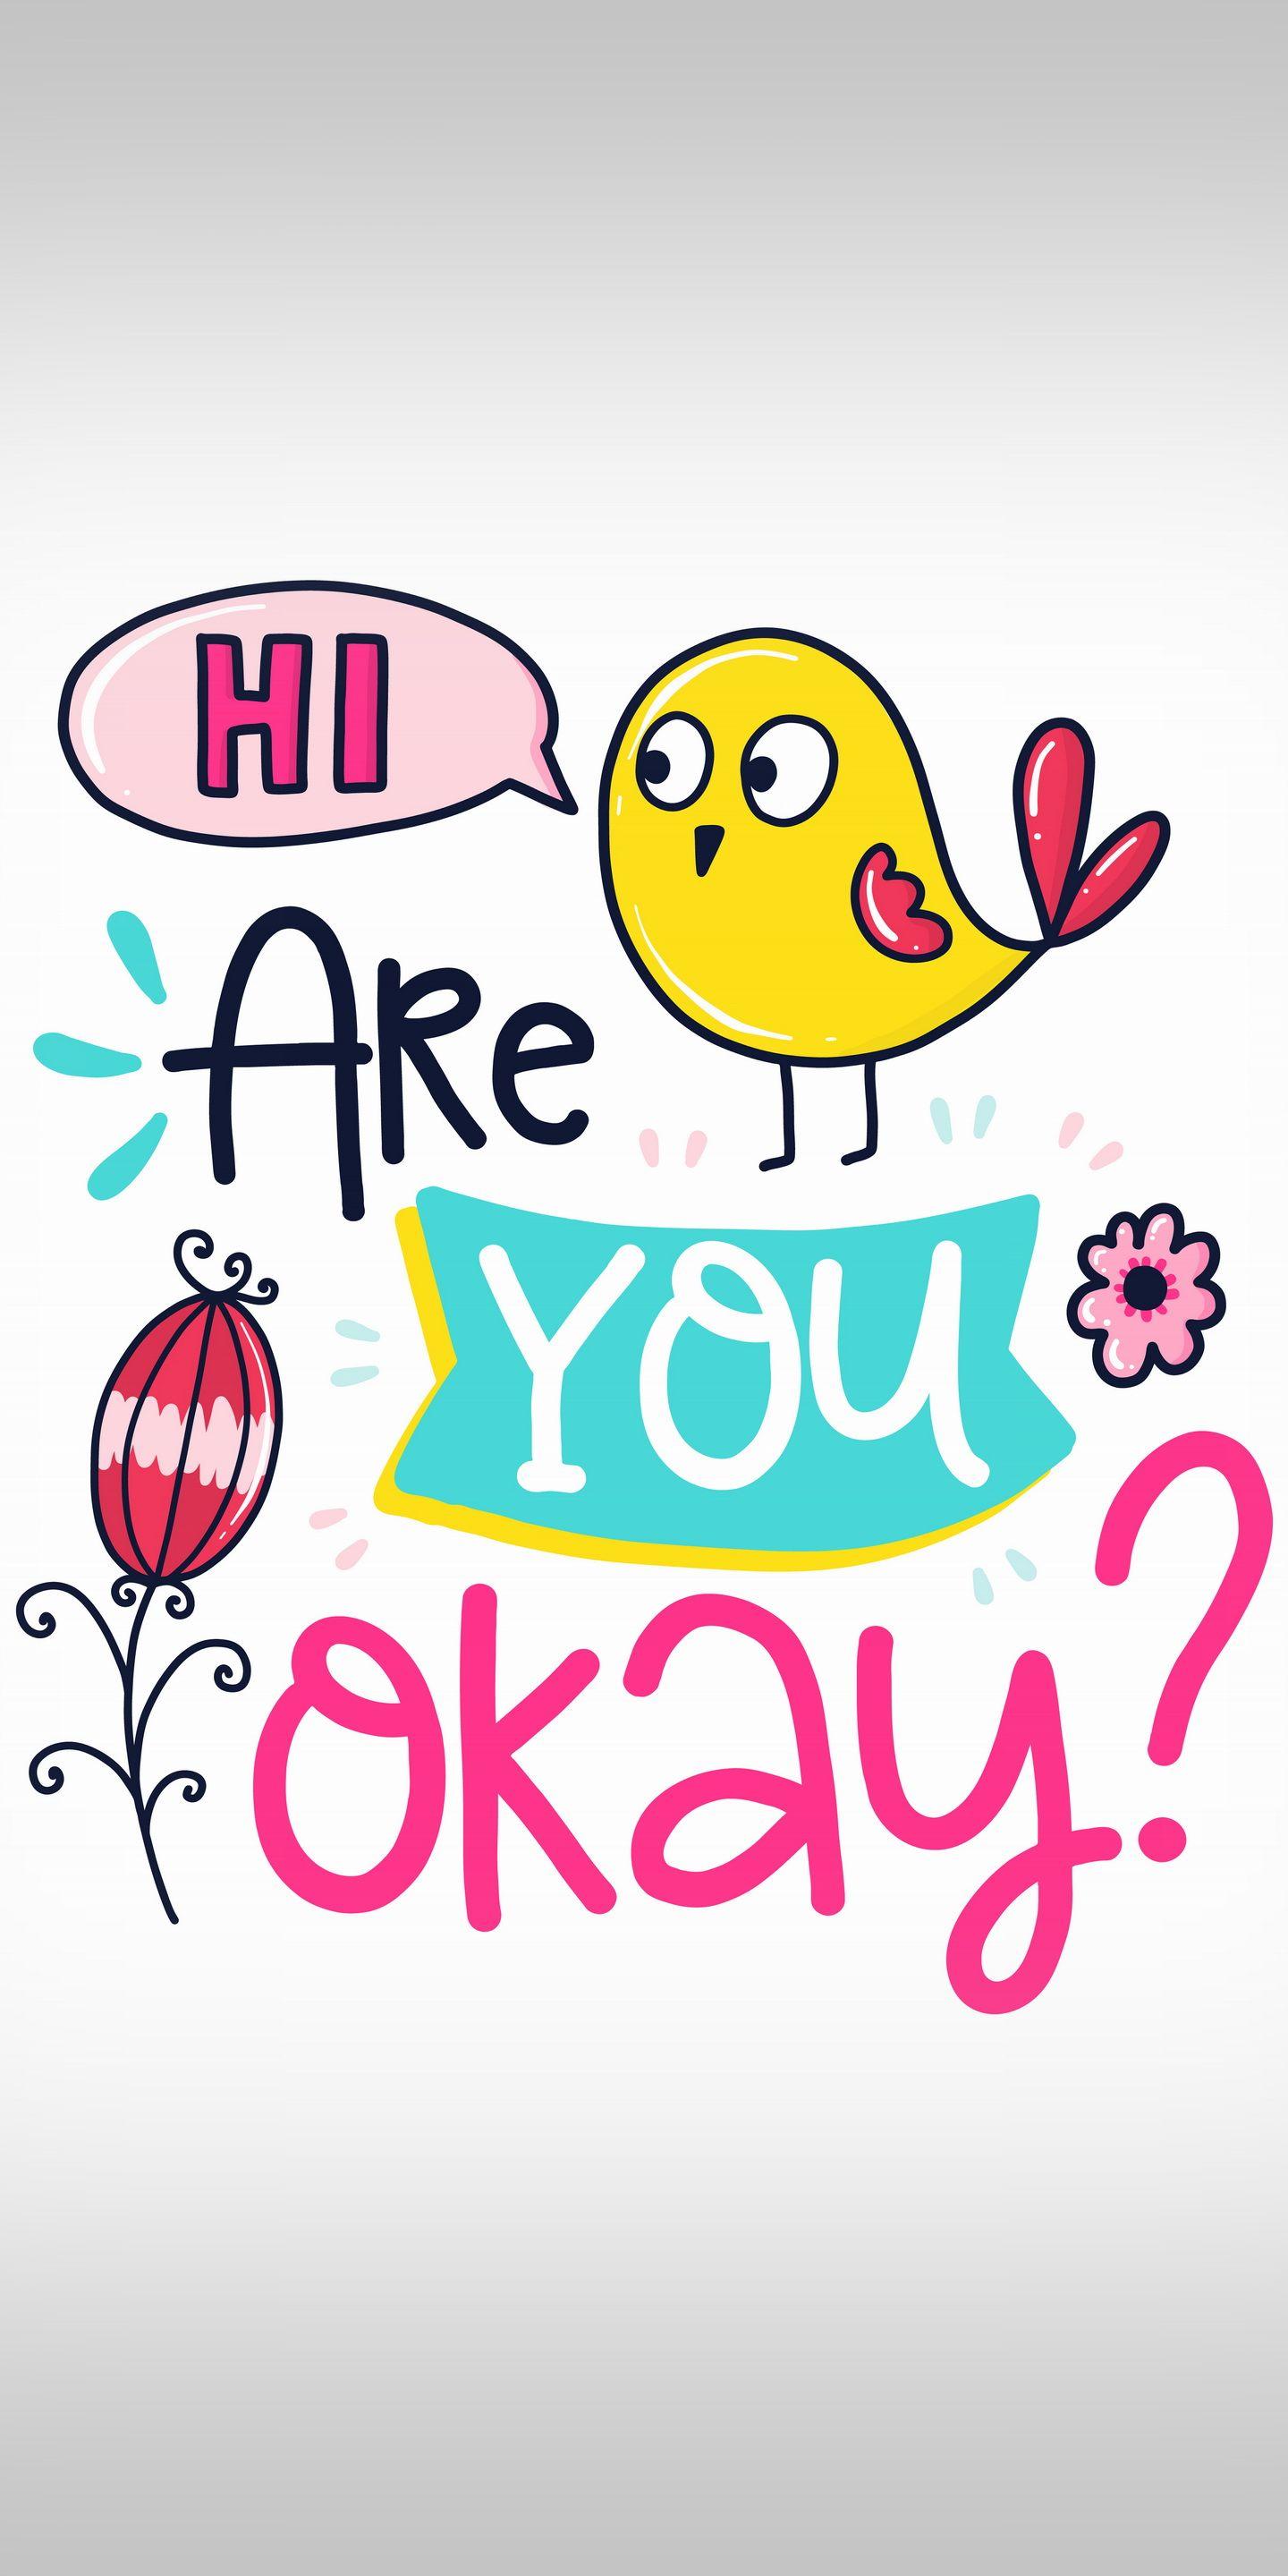 Hi Are You Okay S8 Plus Great Day Quotes Sweet